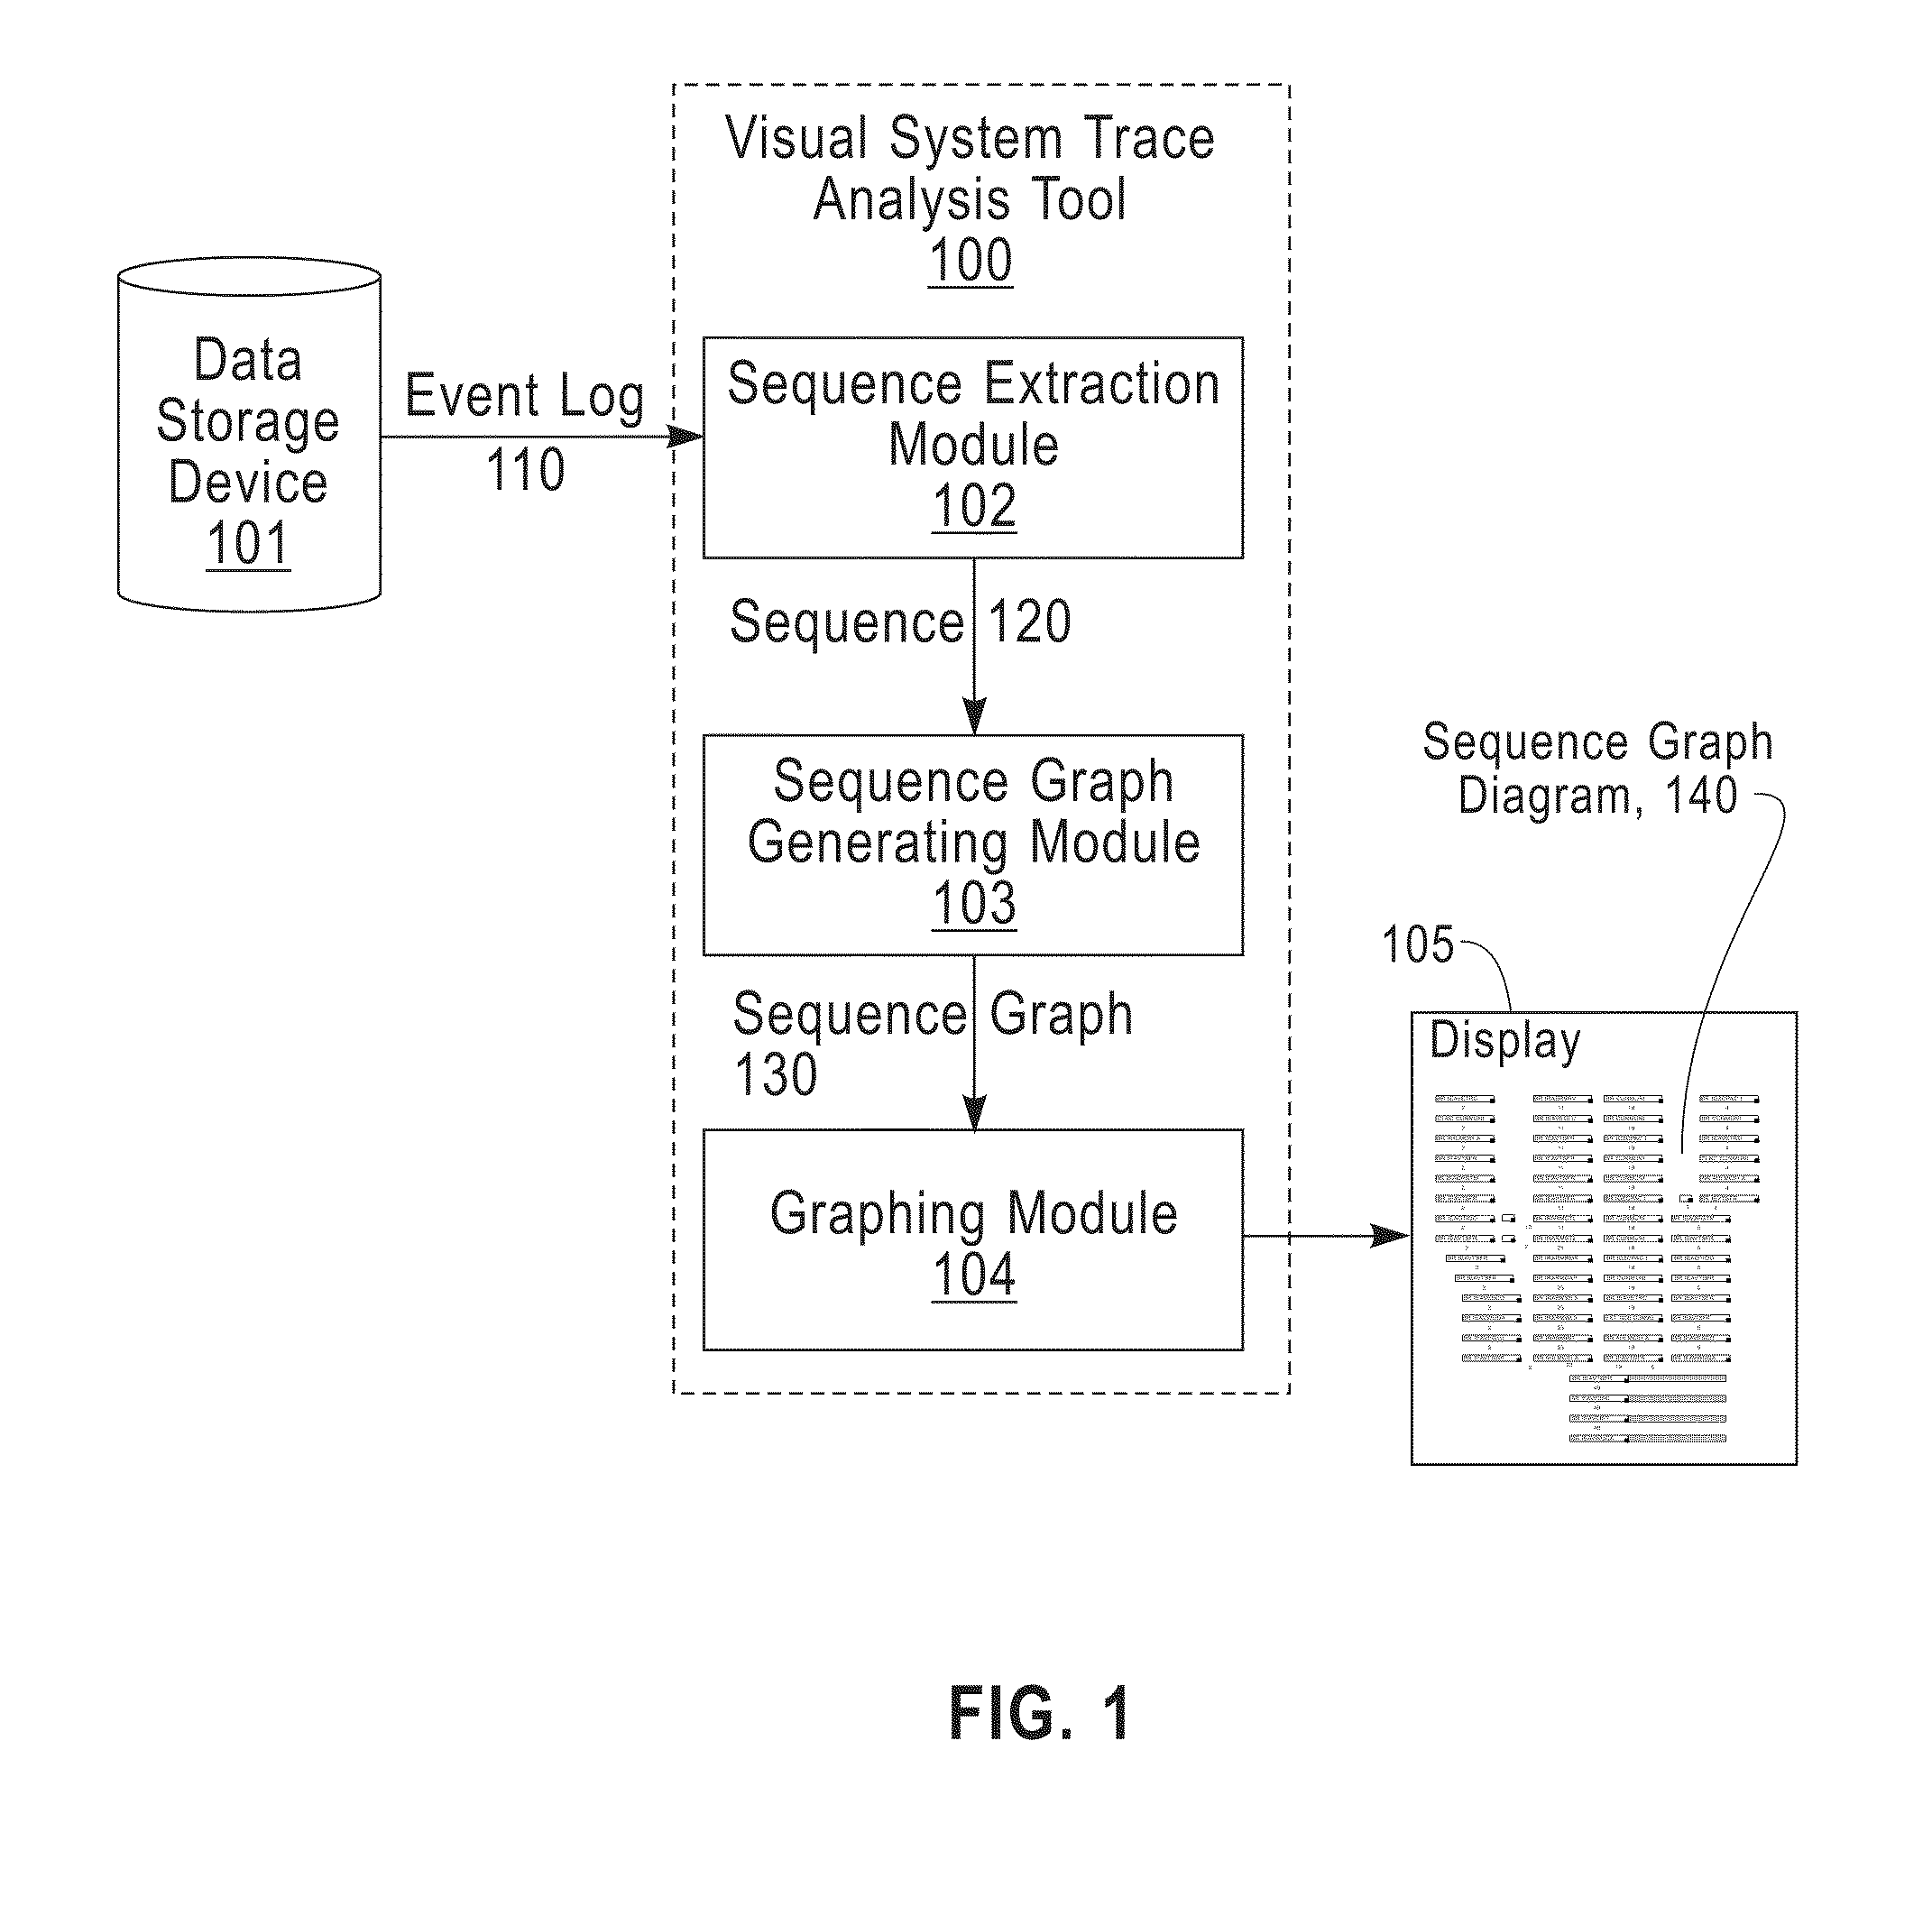 Displaying a visualization of event instances and common event sequences